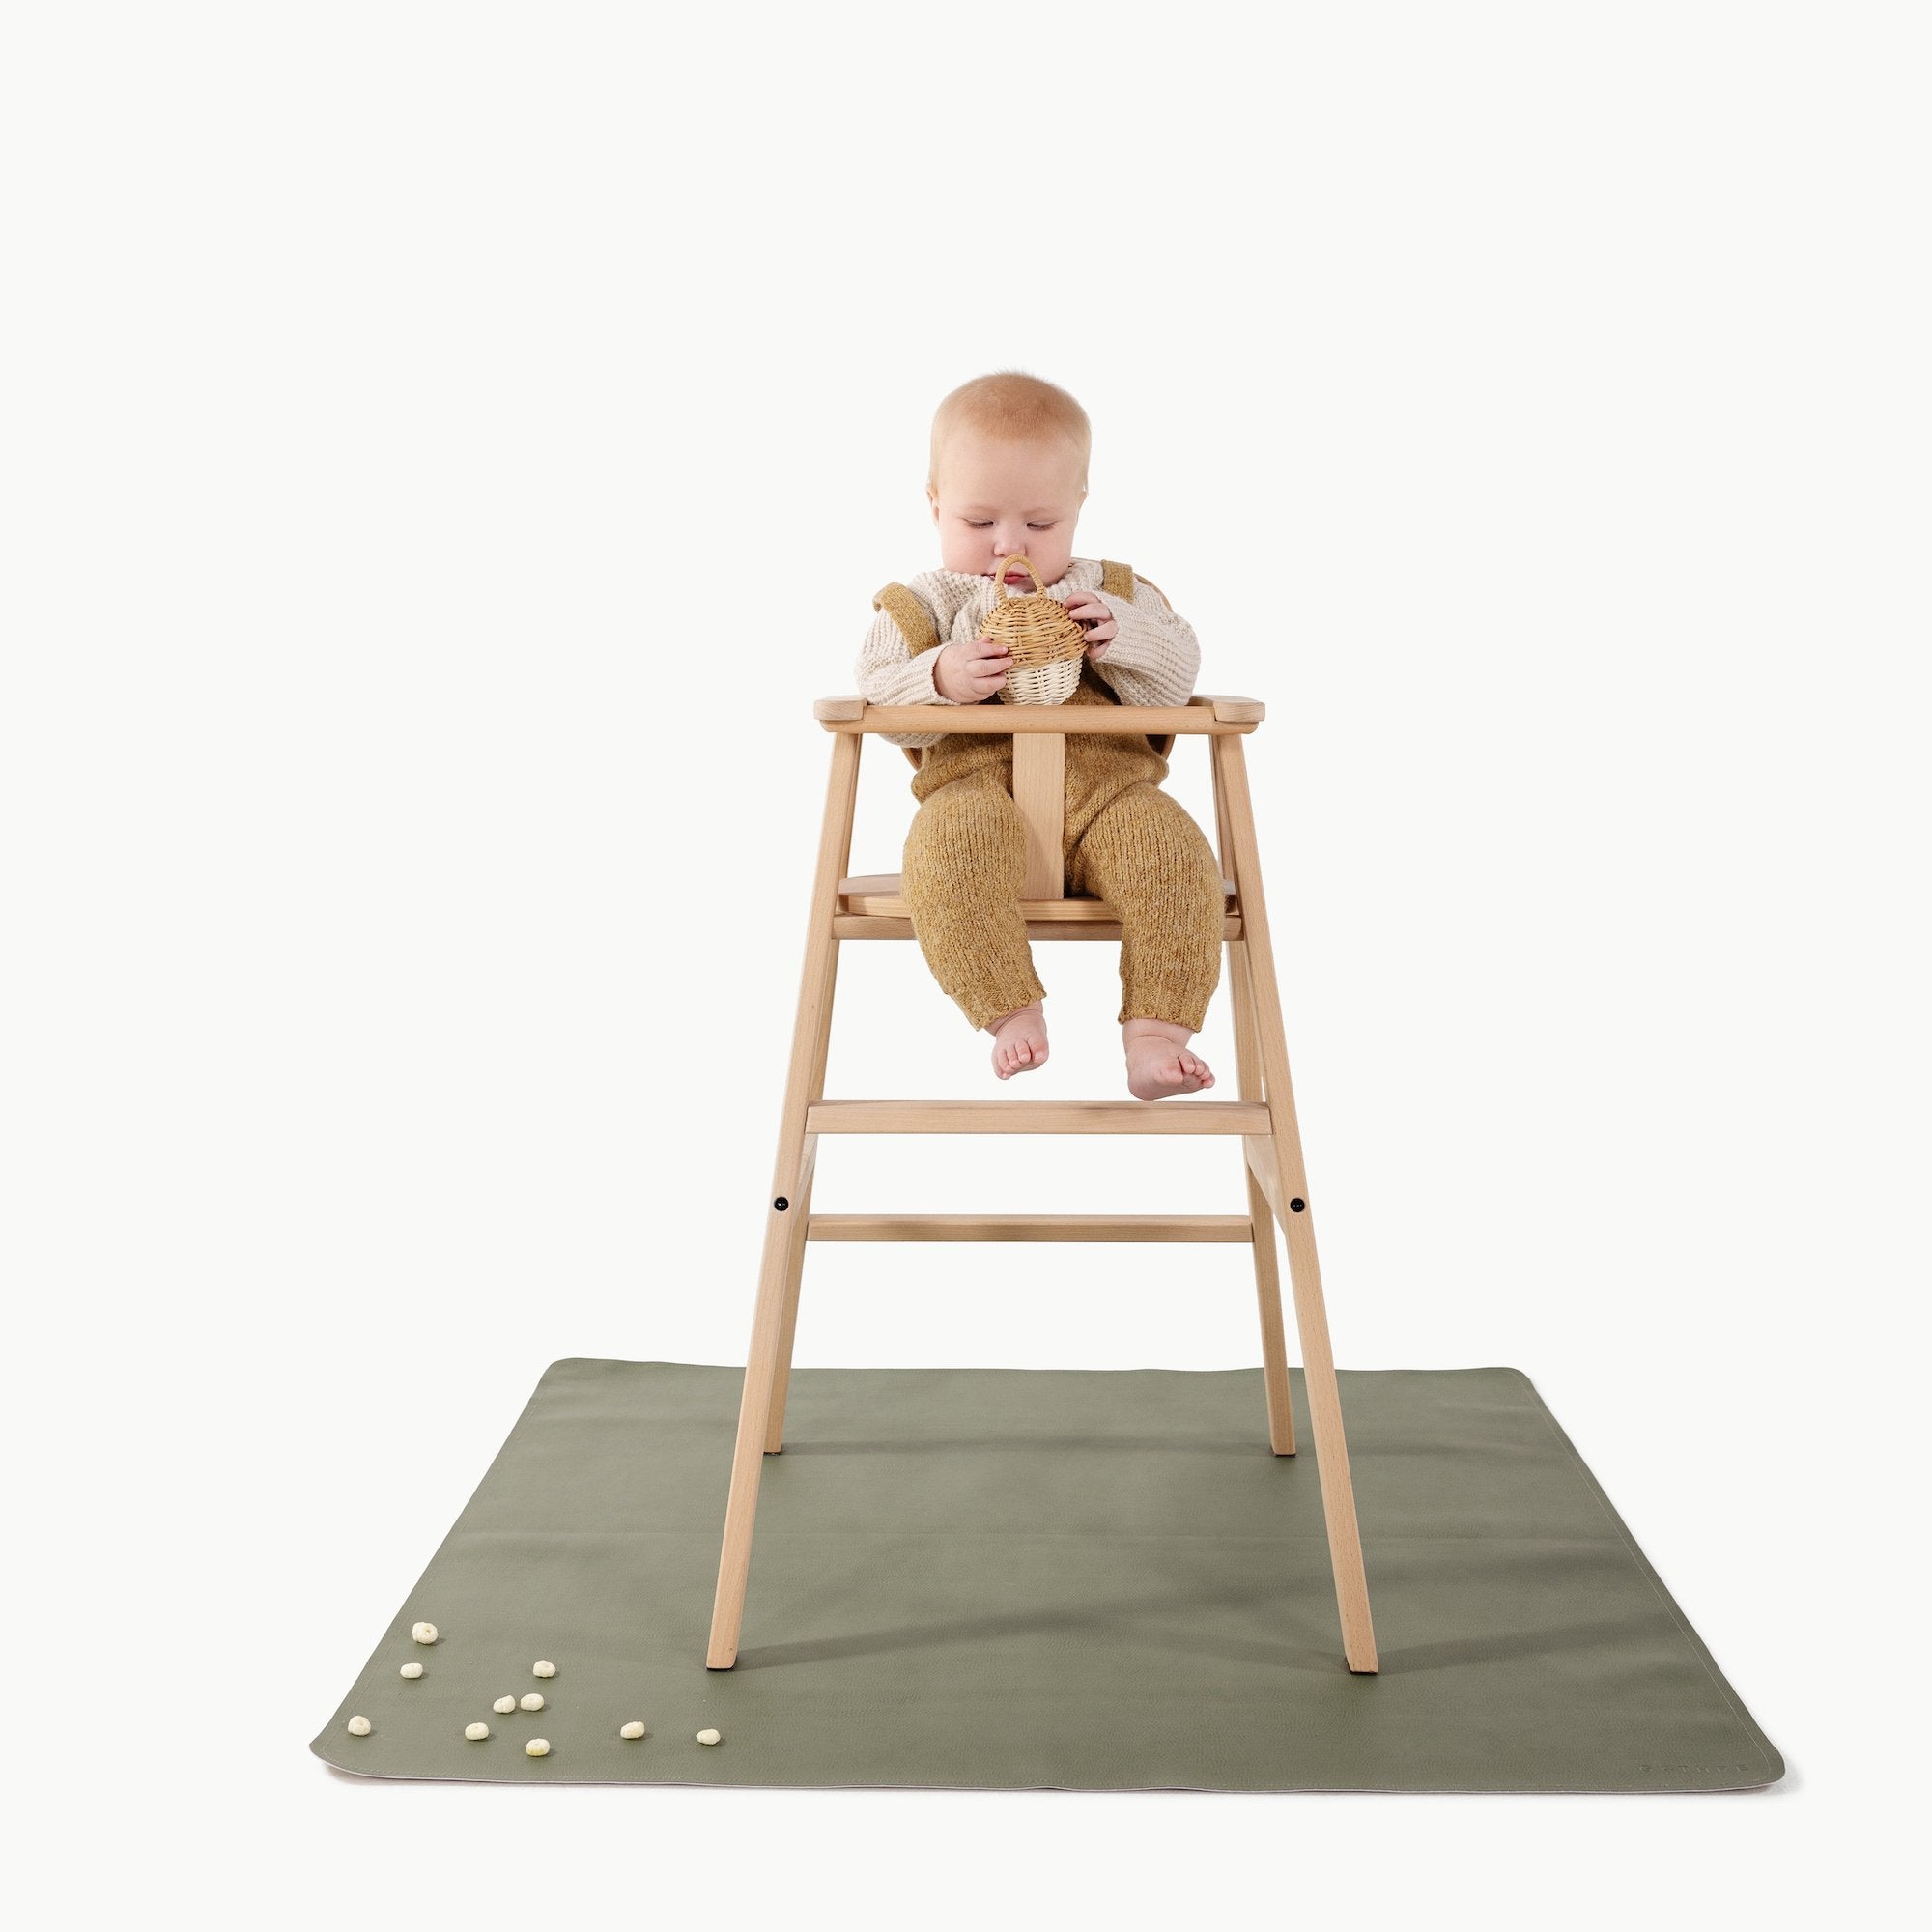 Thyme@Baby in a high chair on the Thyme Mini Mat